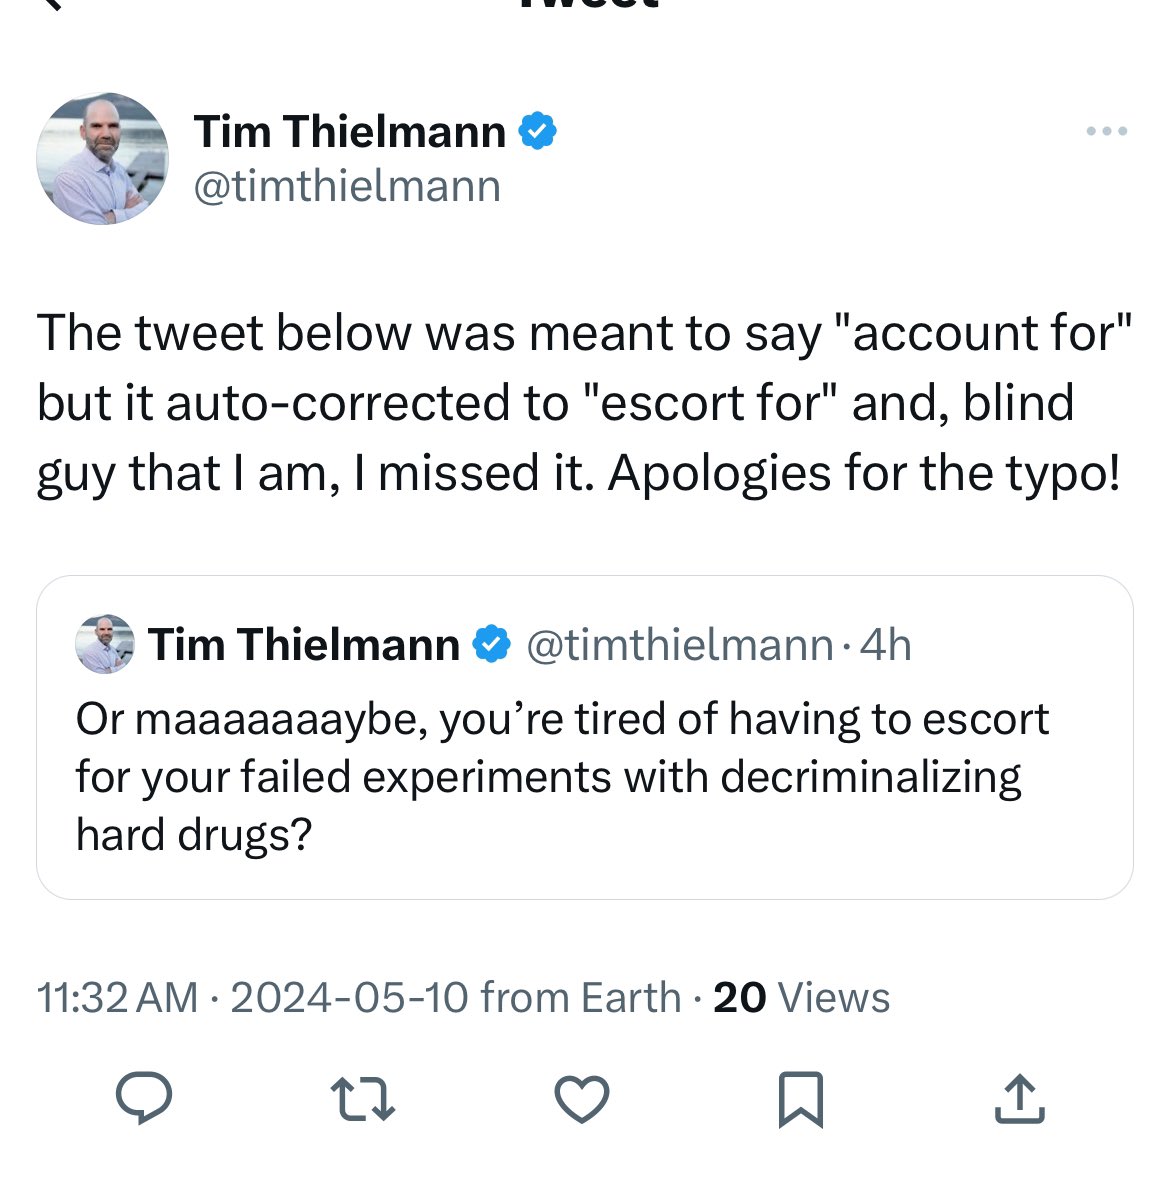 In case Ravi missed it, Tim both explained and apologized.